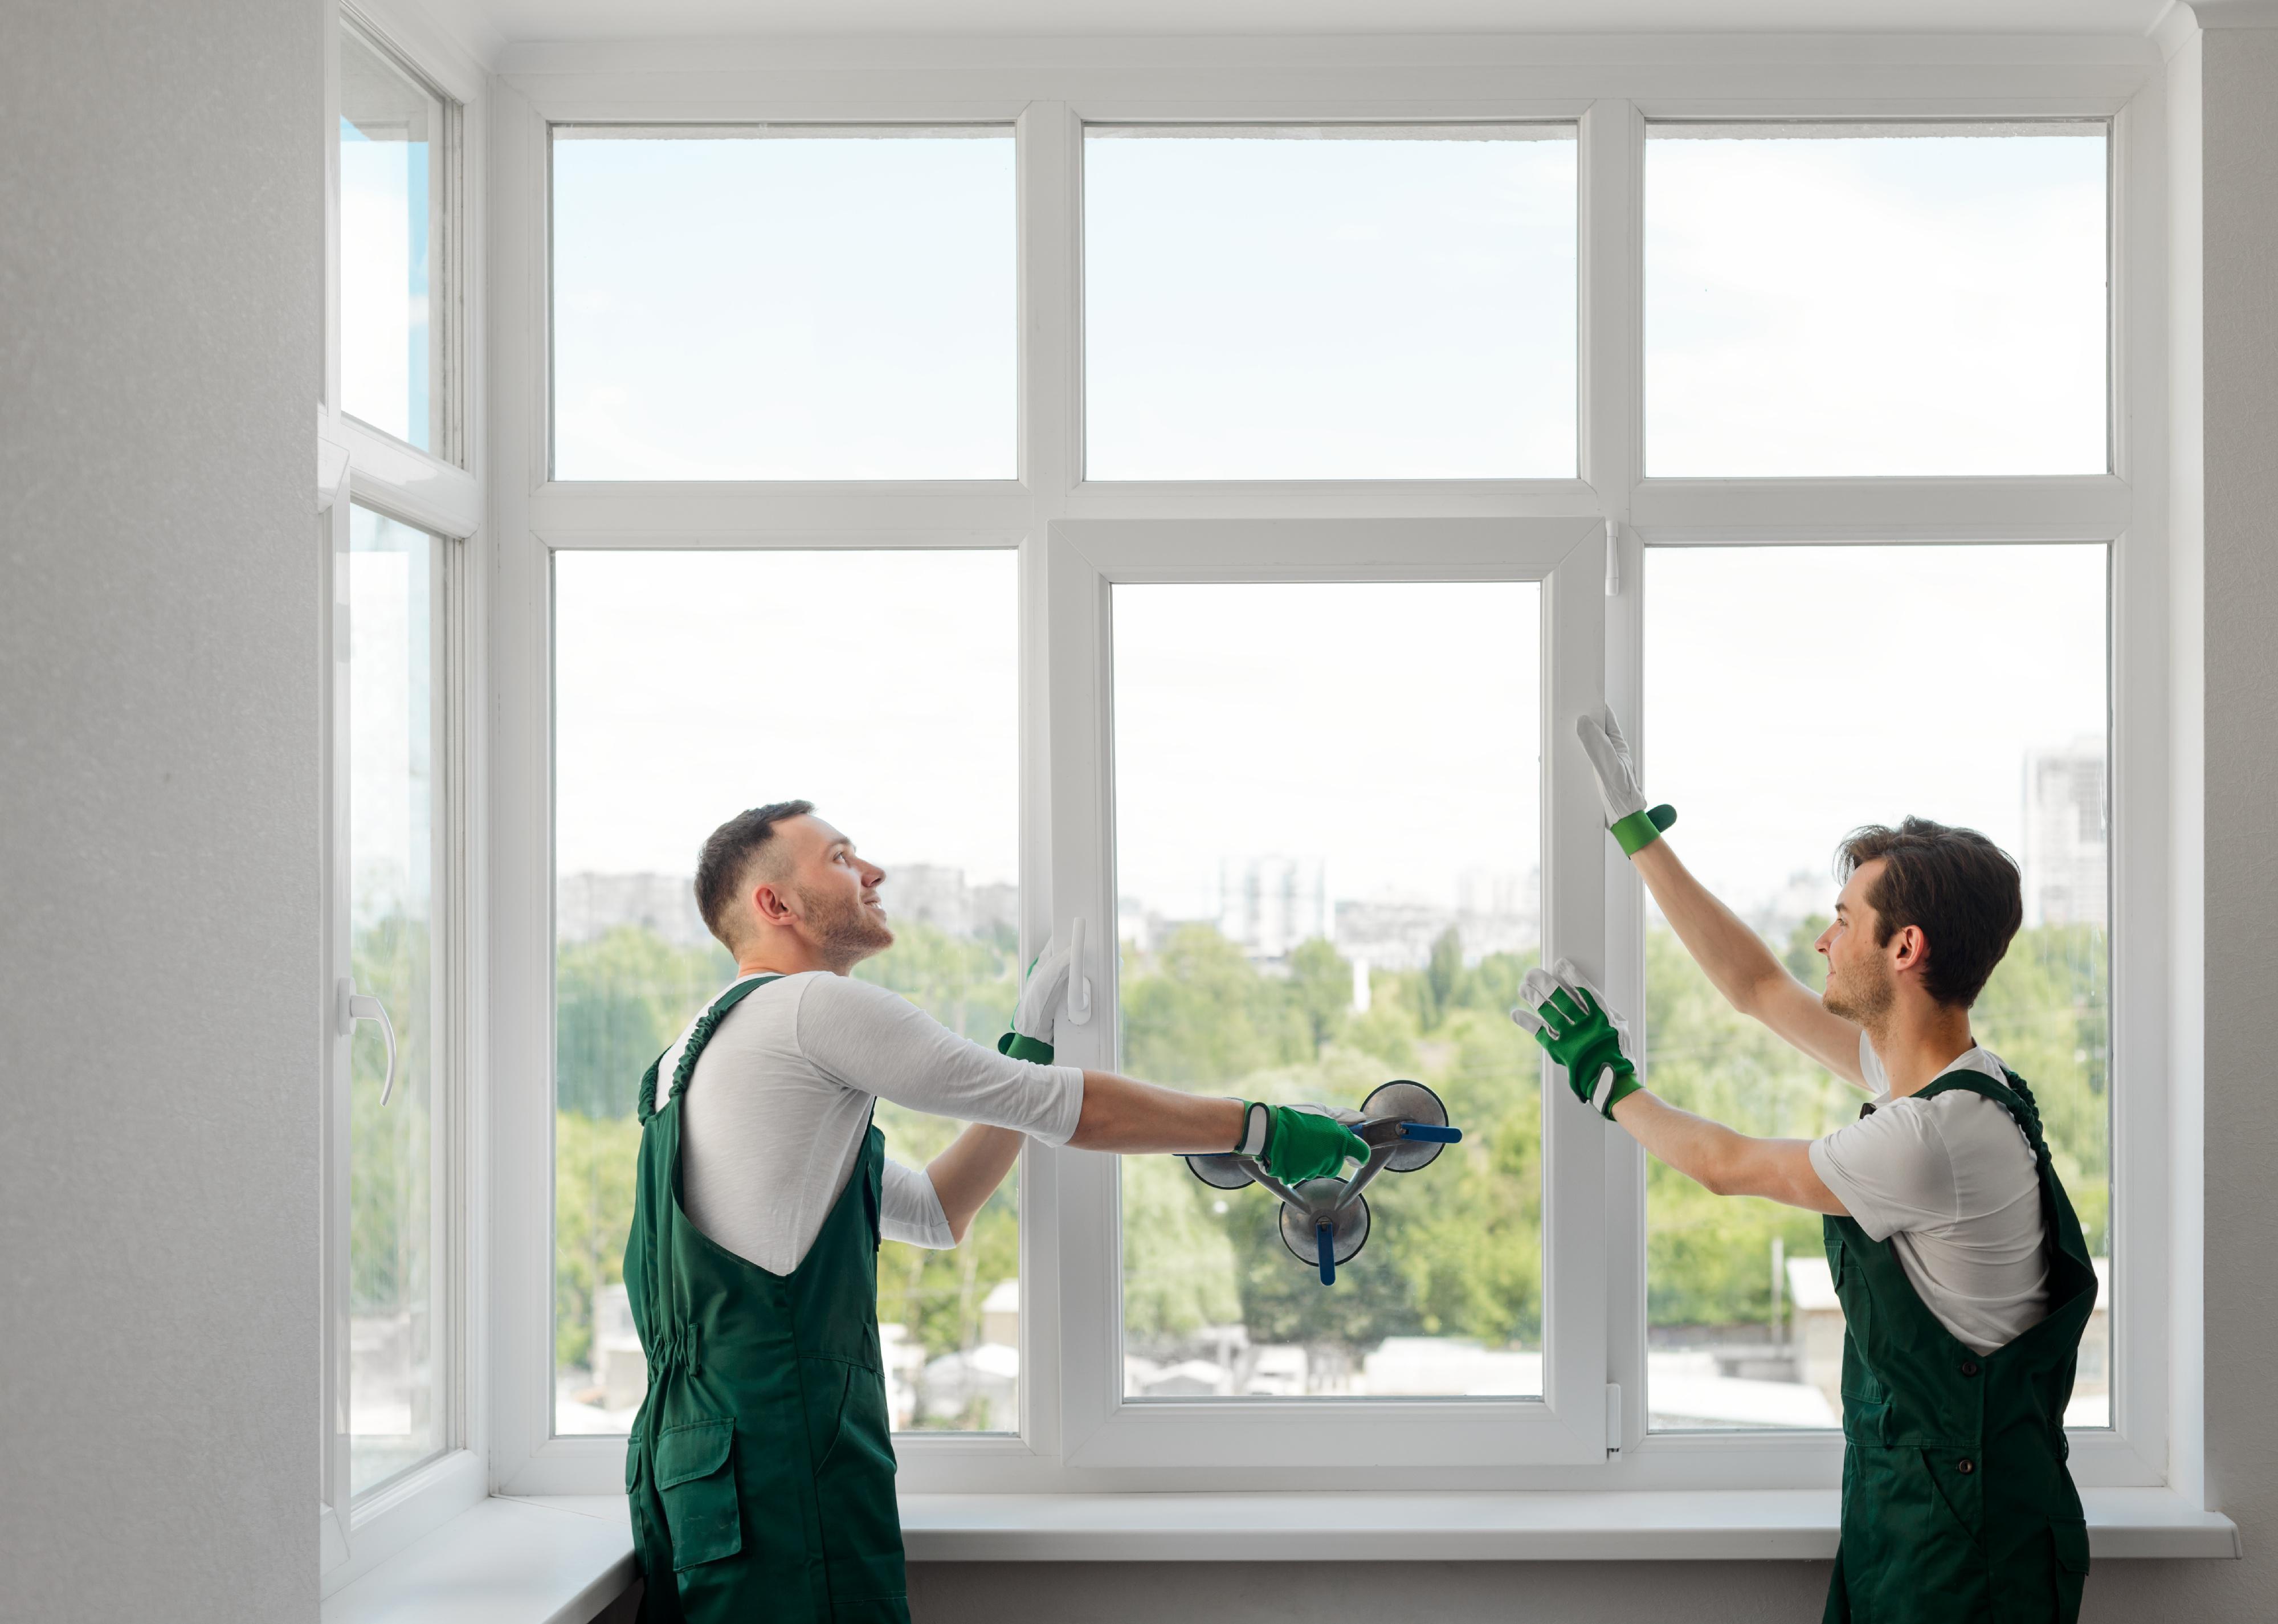 Two glaziers in green overalls and gloves replace windows in a home